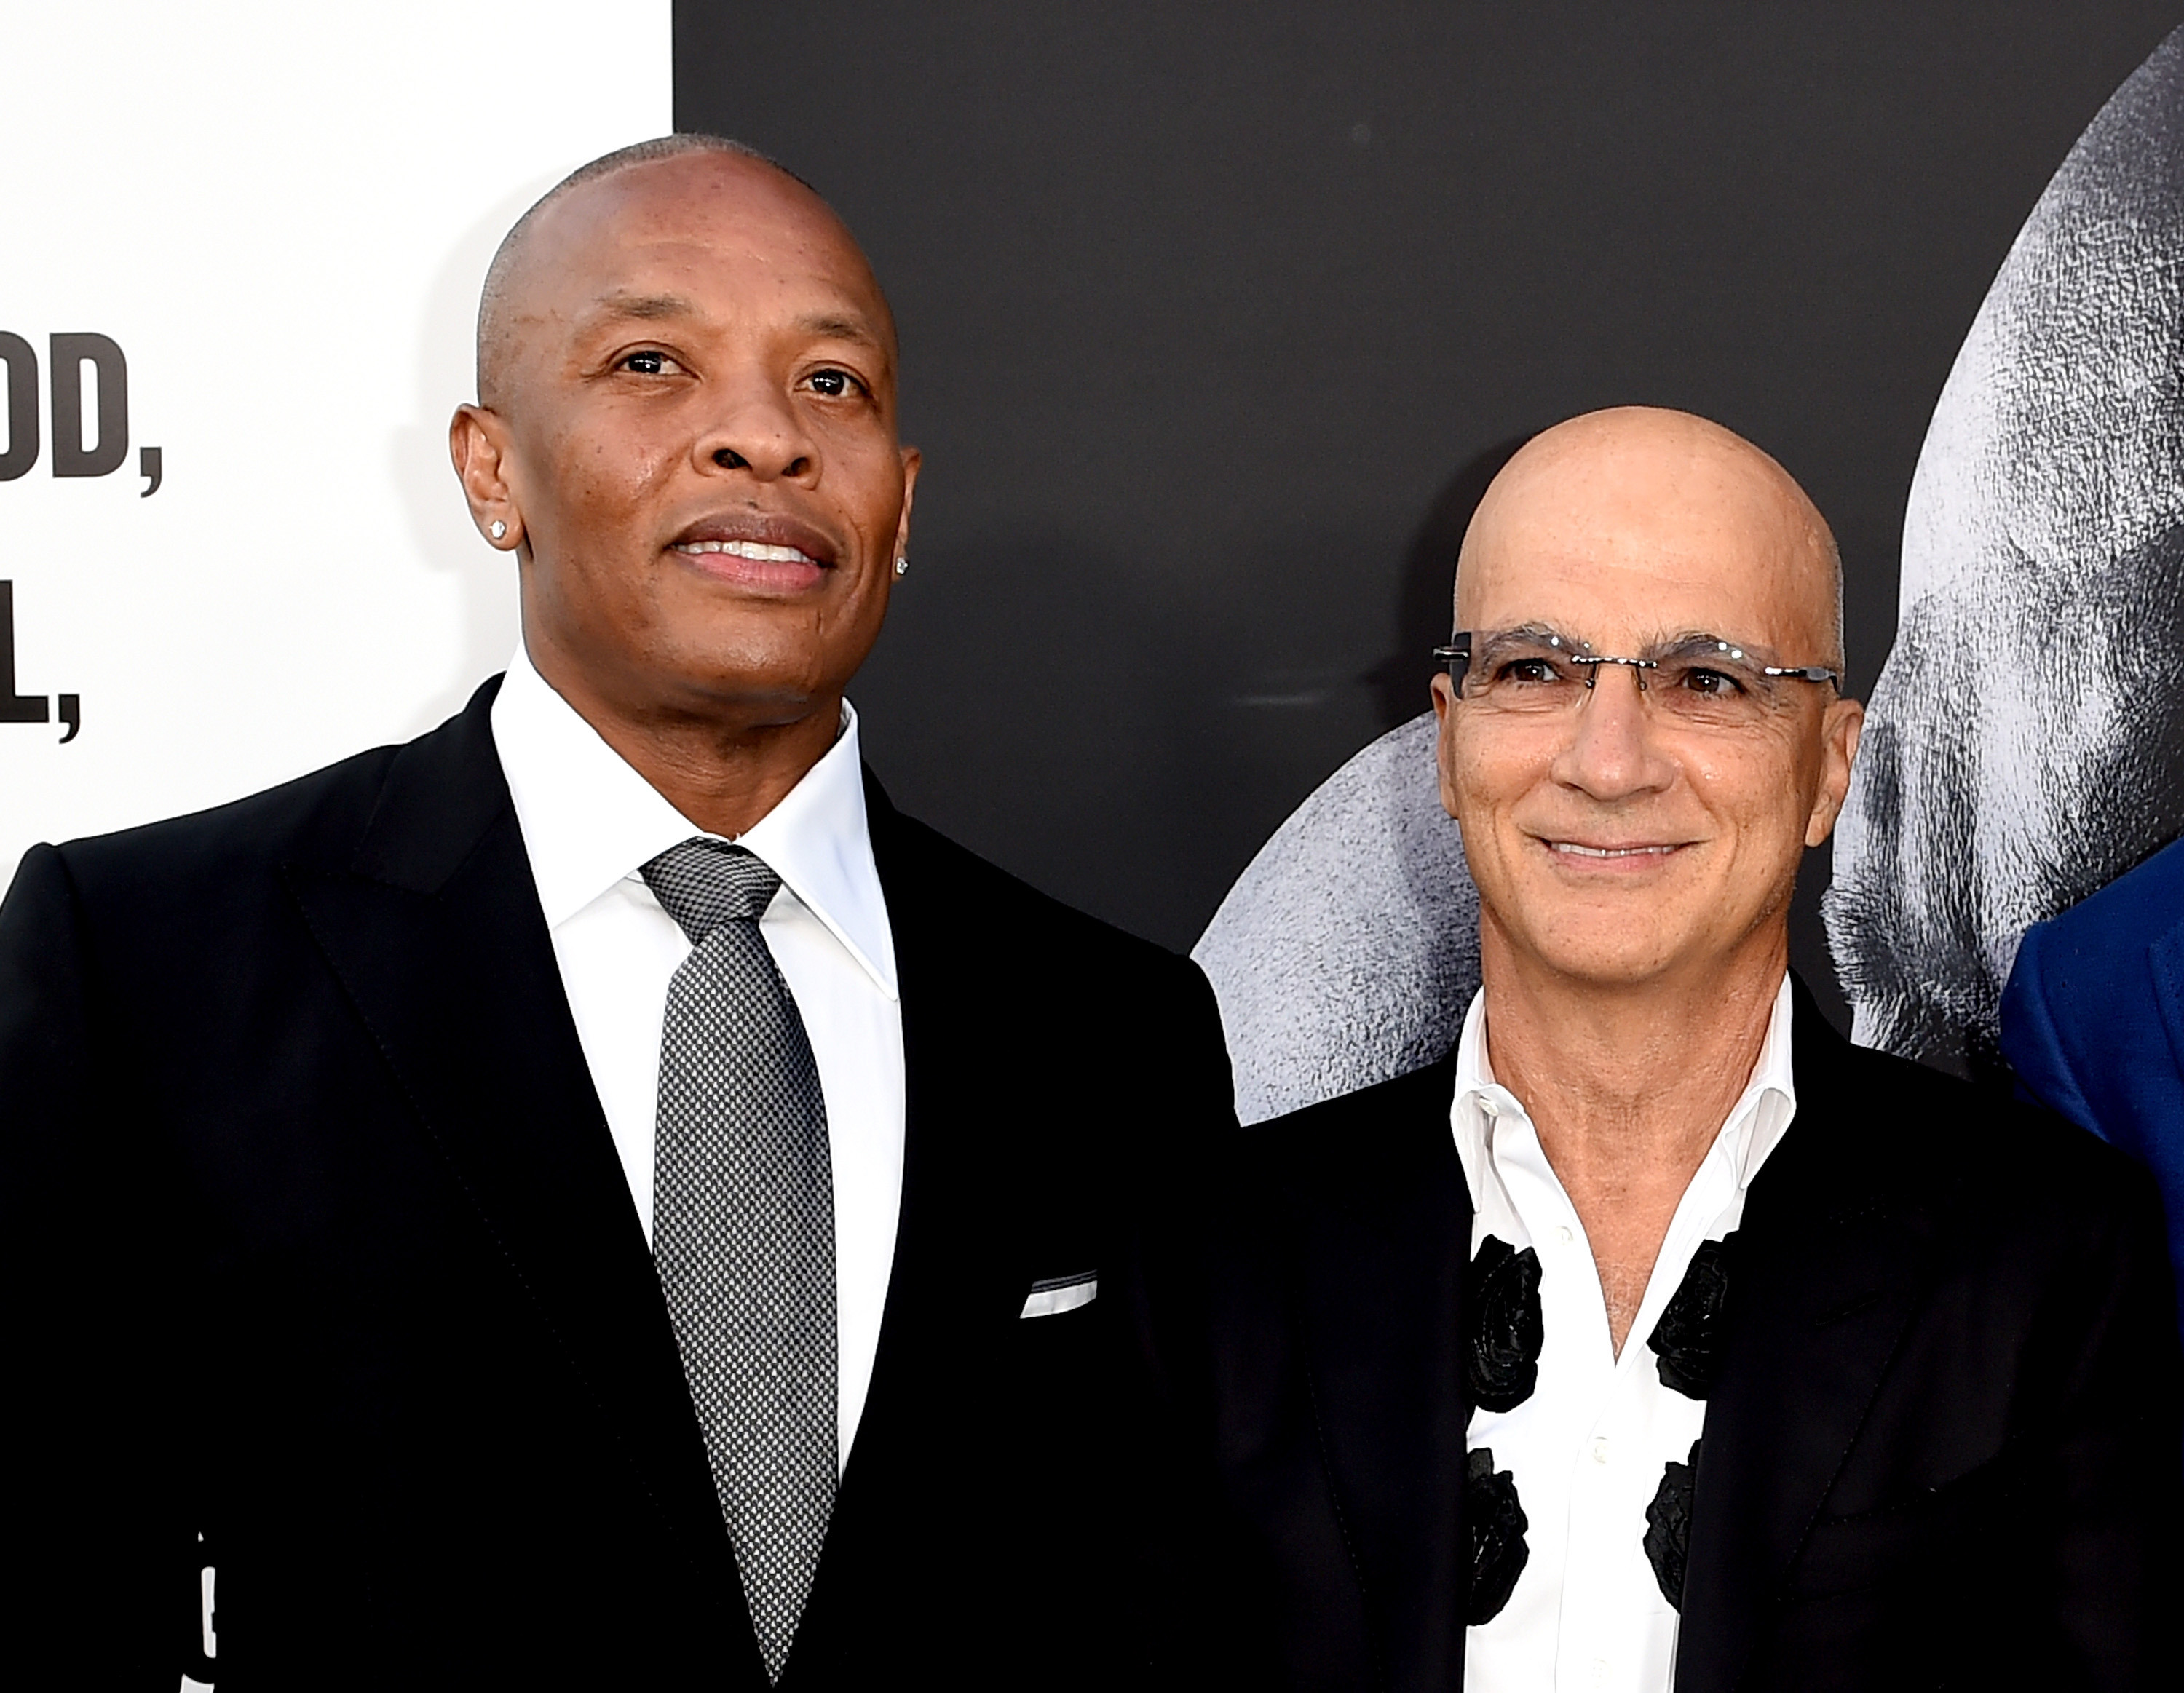 Dr. Dre Opens Up About Brain Aneurysm: 'They Thought I Was Outta Here'